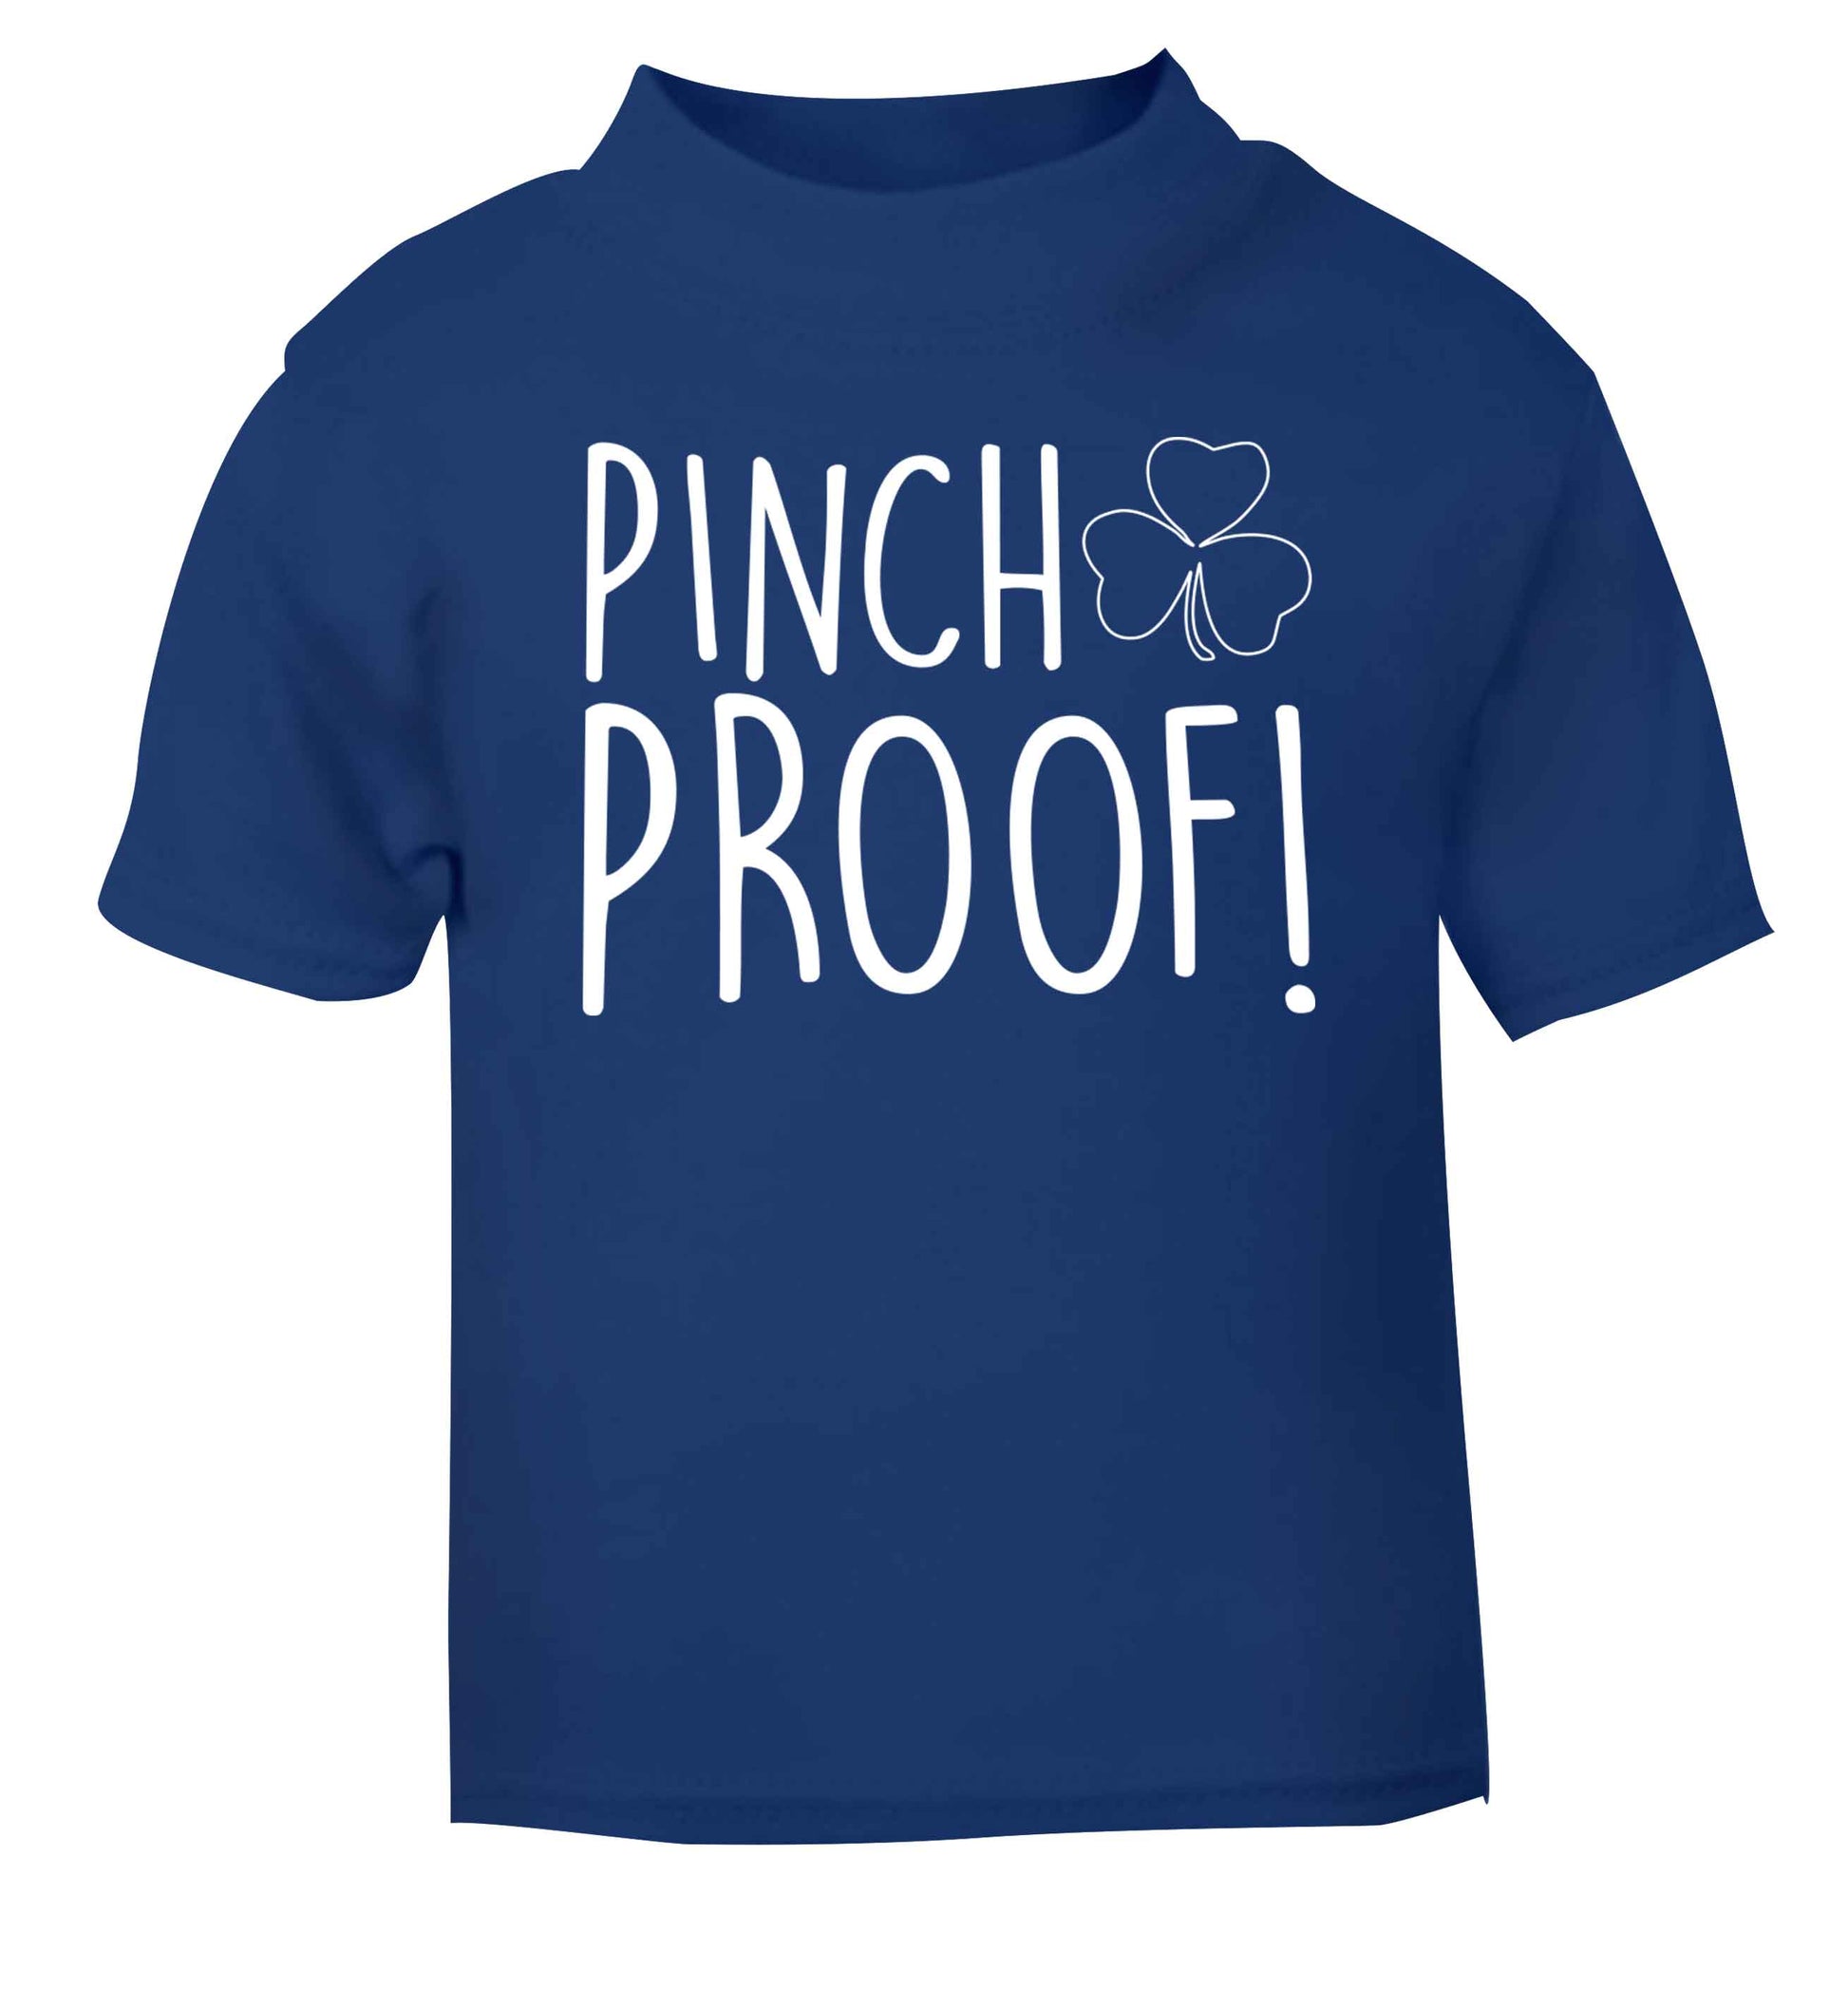 Pinch Proof blue baby toddler Tshirt 2 Years